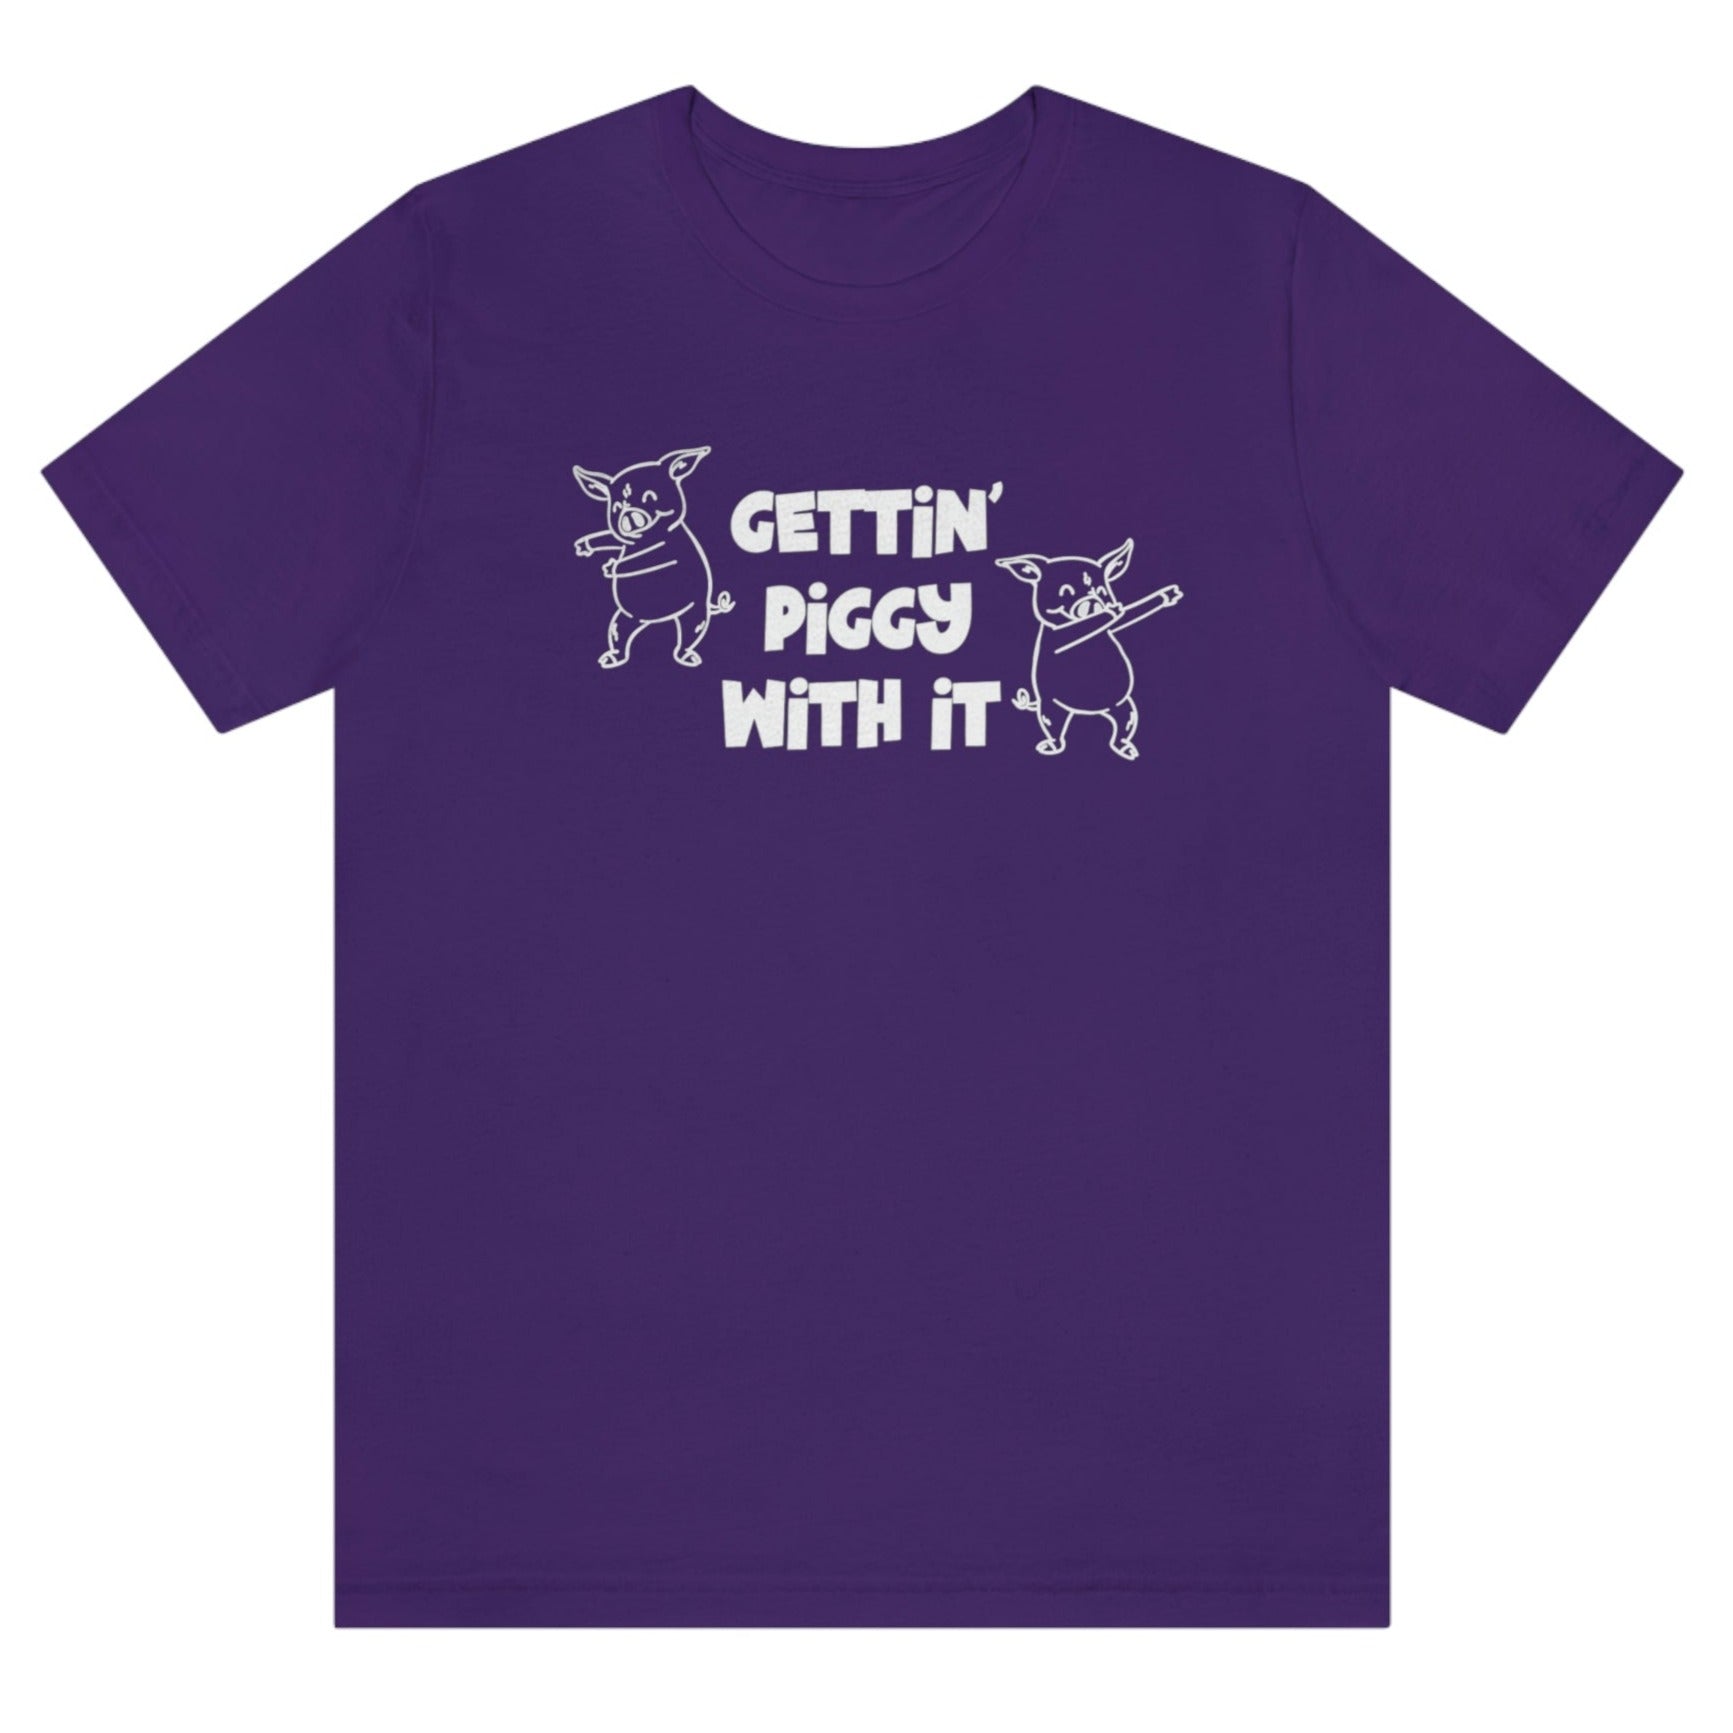 gettin-piggy-with-it-team-purple-t-shirt-funny-dancing-pigs